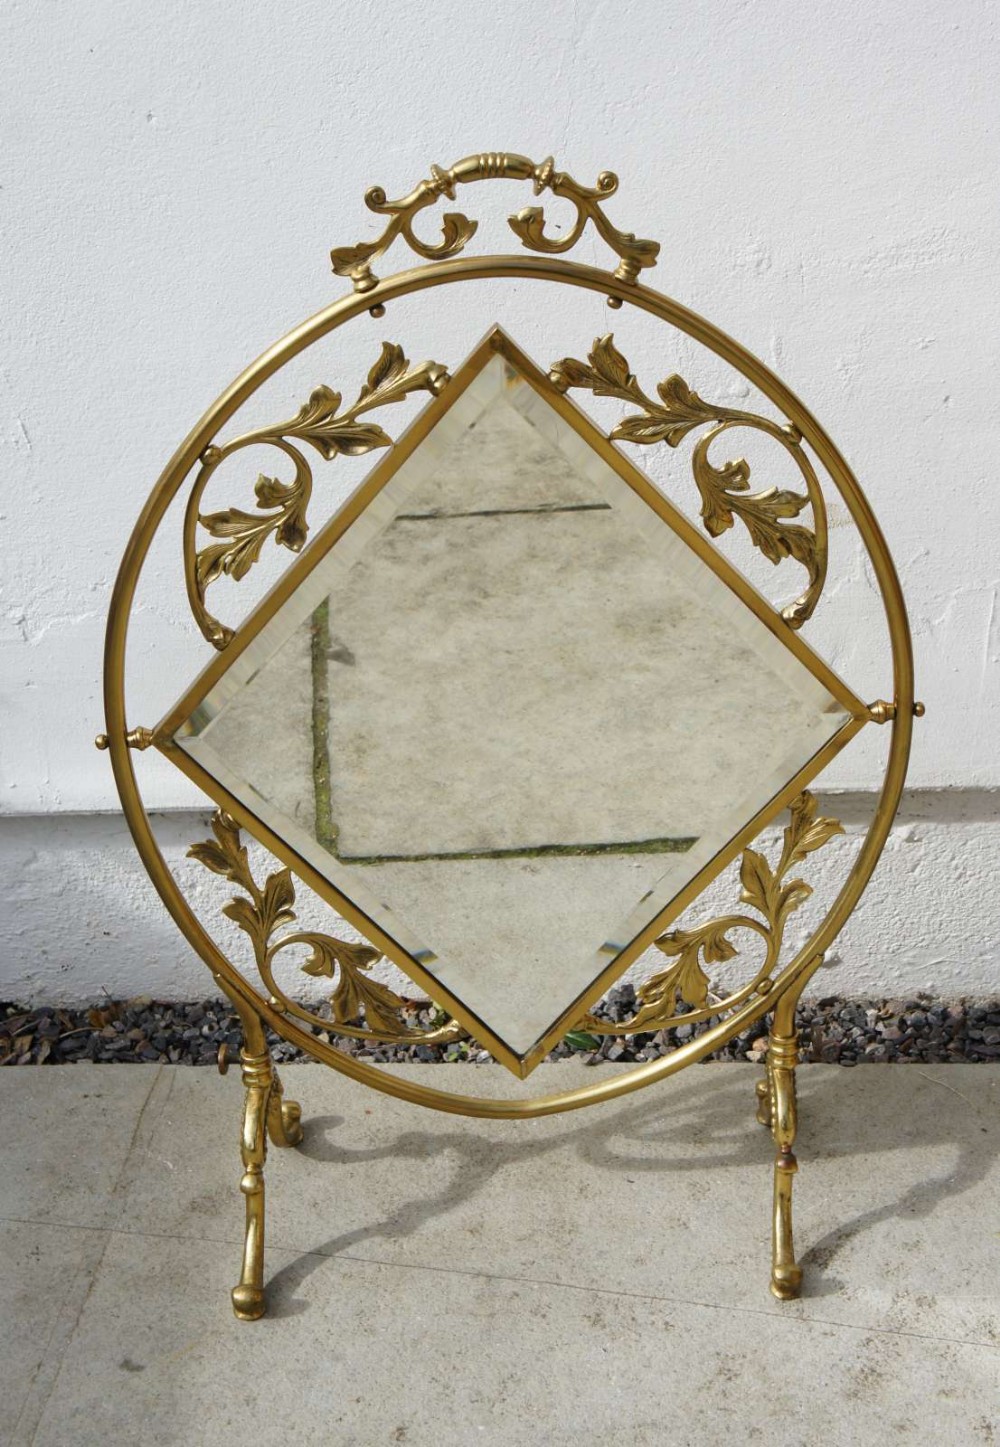 Antiqued Brass Fireplace Screen Best Of Elegant Early 20th C Mirrored Brass Fire Screen